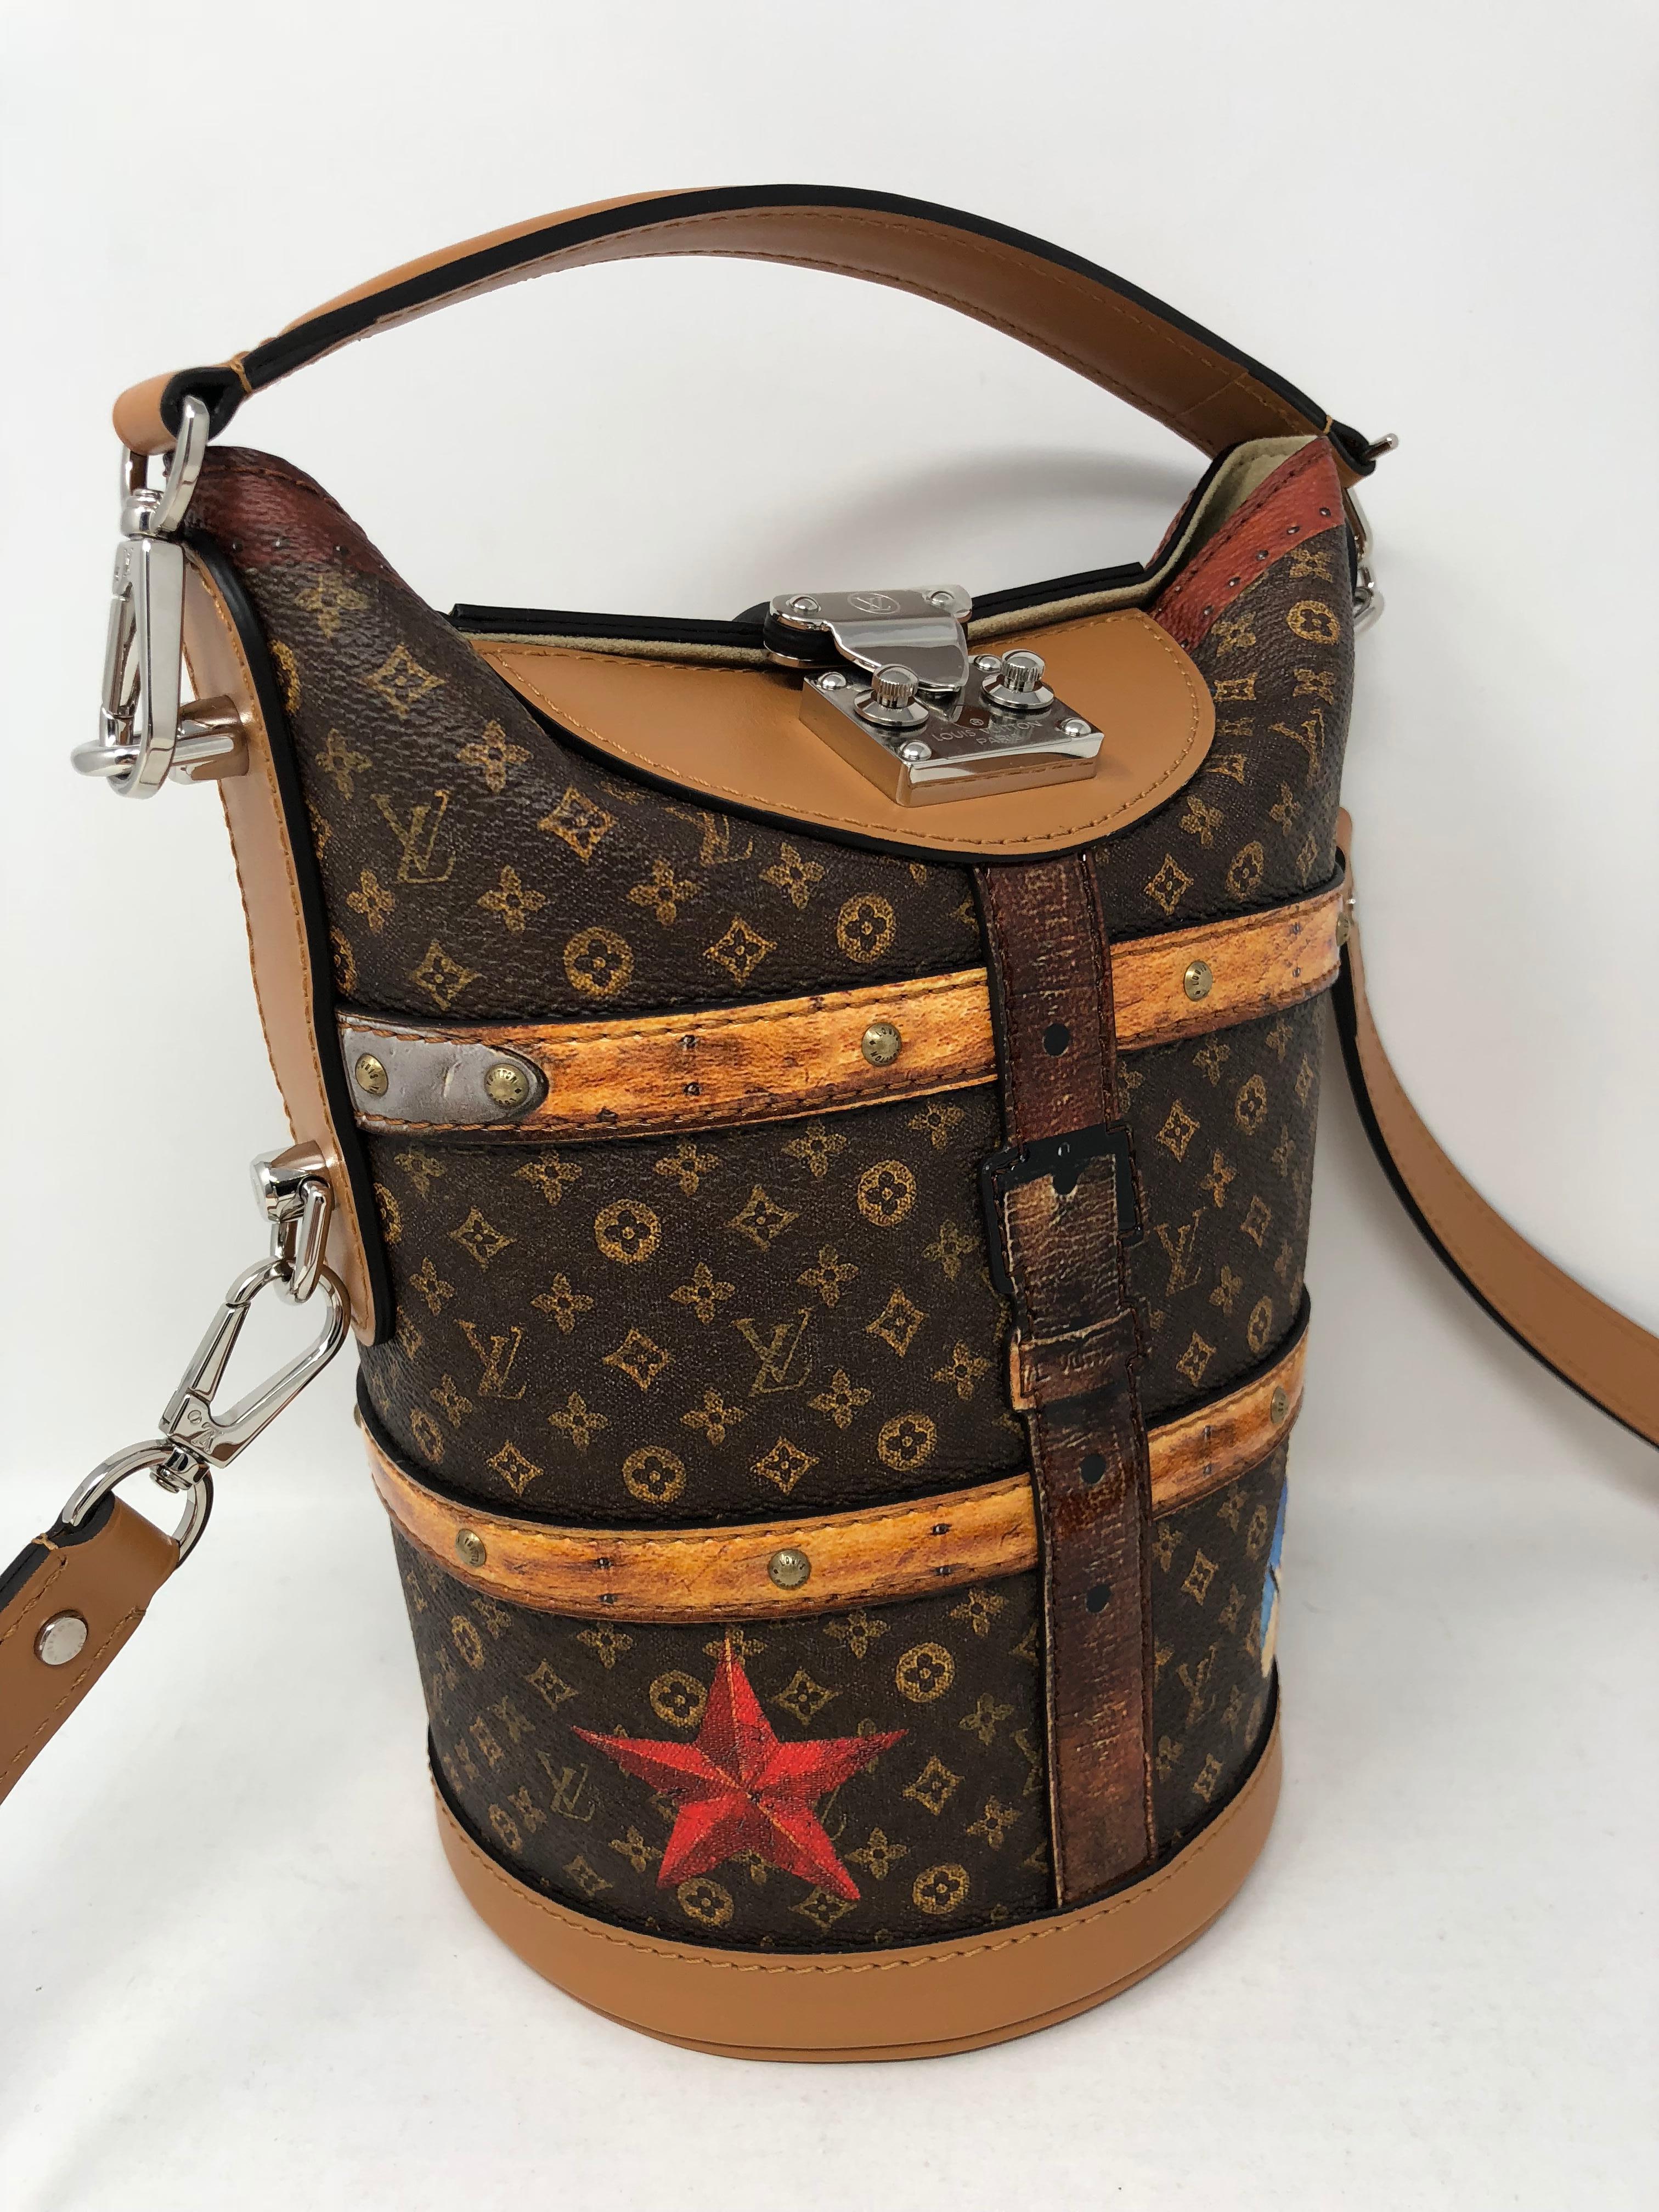 Louis Vuitton The Duffle Time Trunk Bag from Fall-Winter 2018 collection. Runway piece that is limited and sold out. The look was created to have a vintage appeal to the House's Trunk making roots. A painterly look throughout the piece and antiqued